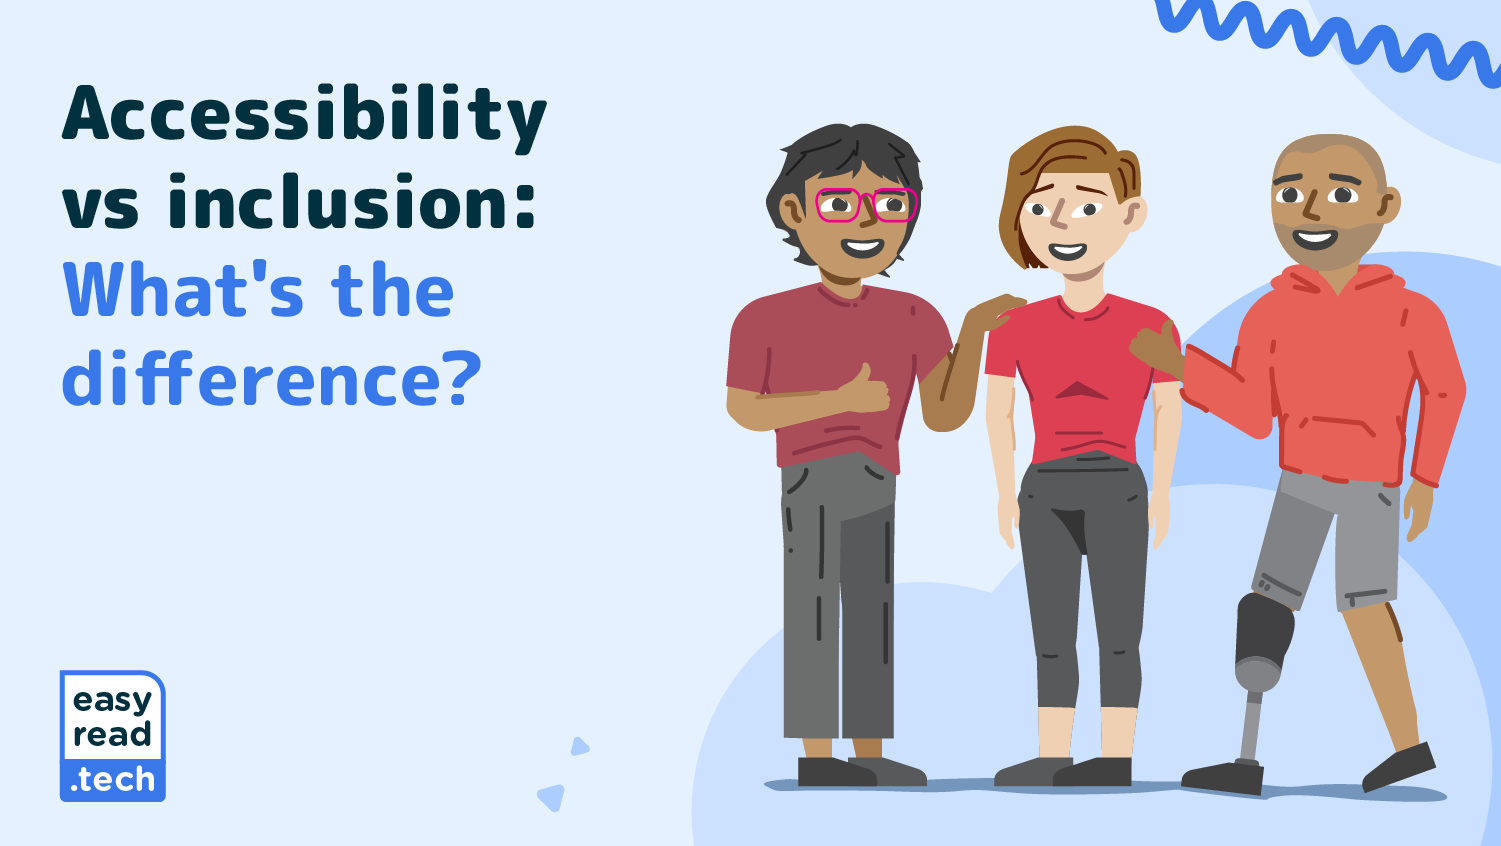 Accessibility vs inclusion: What's the difference?